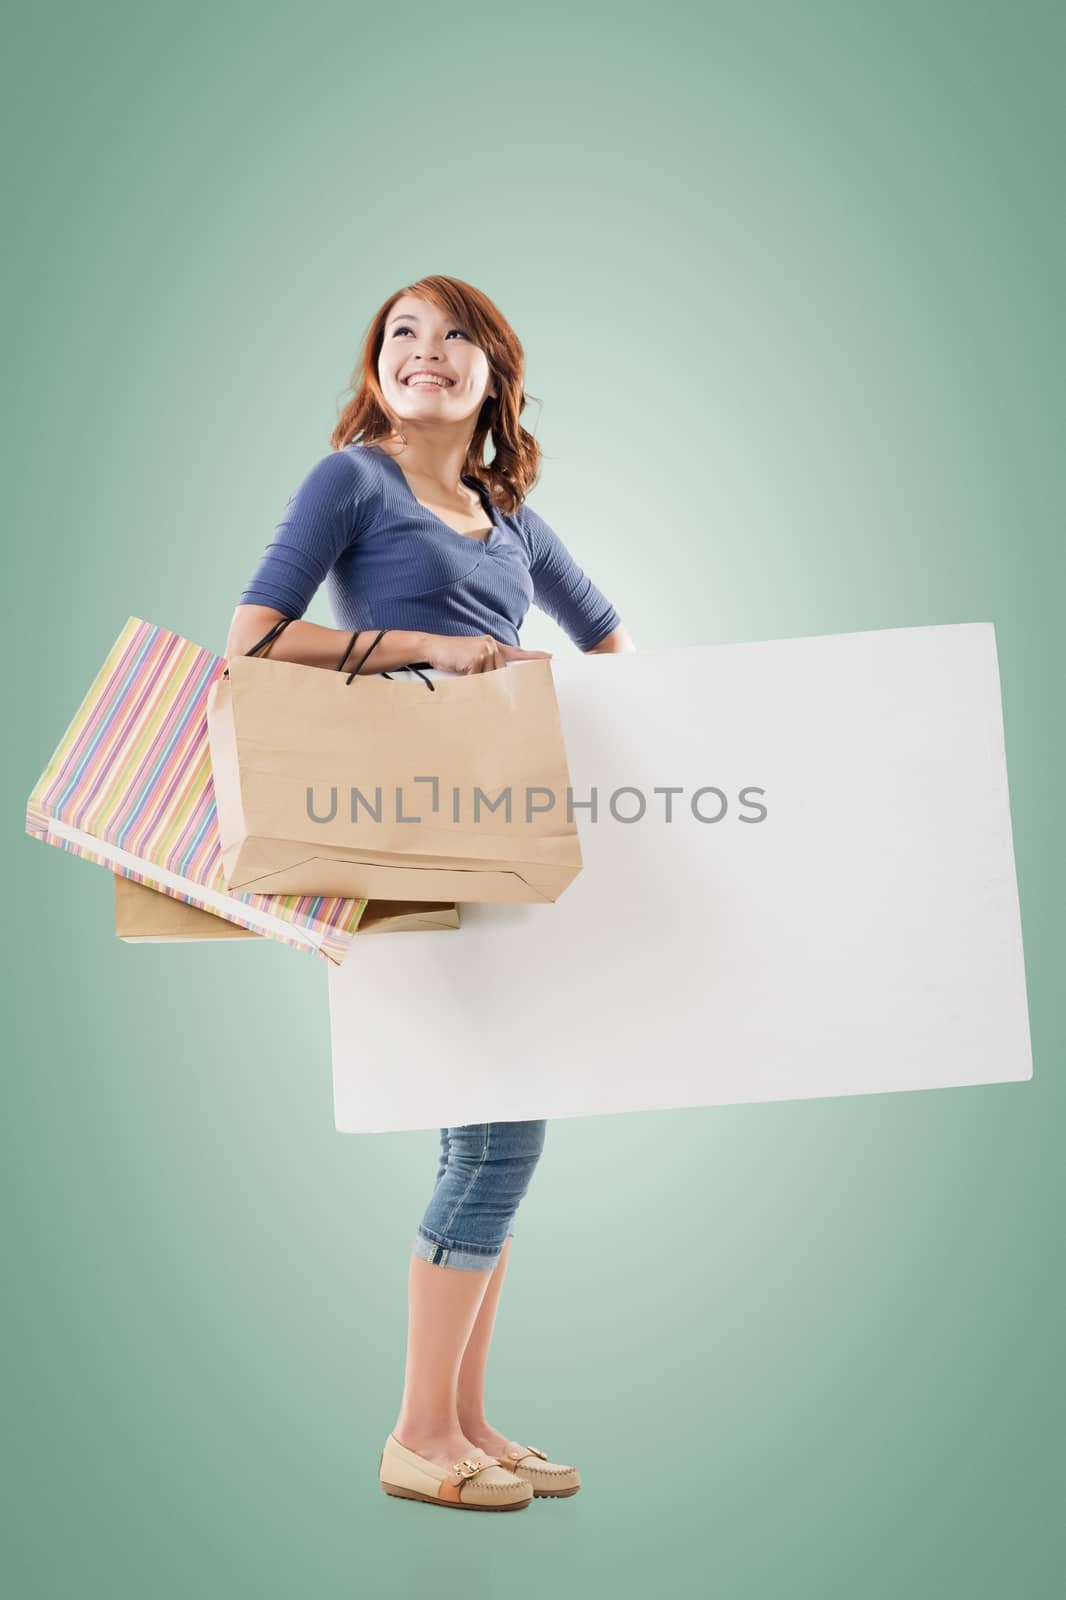 Shopping woman holding bags and blank board, full length portrait isolated.